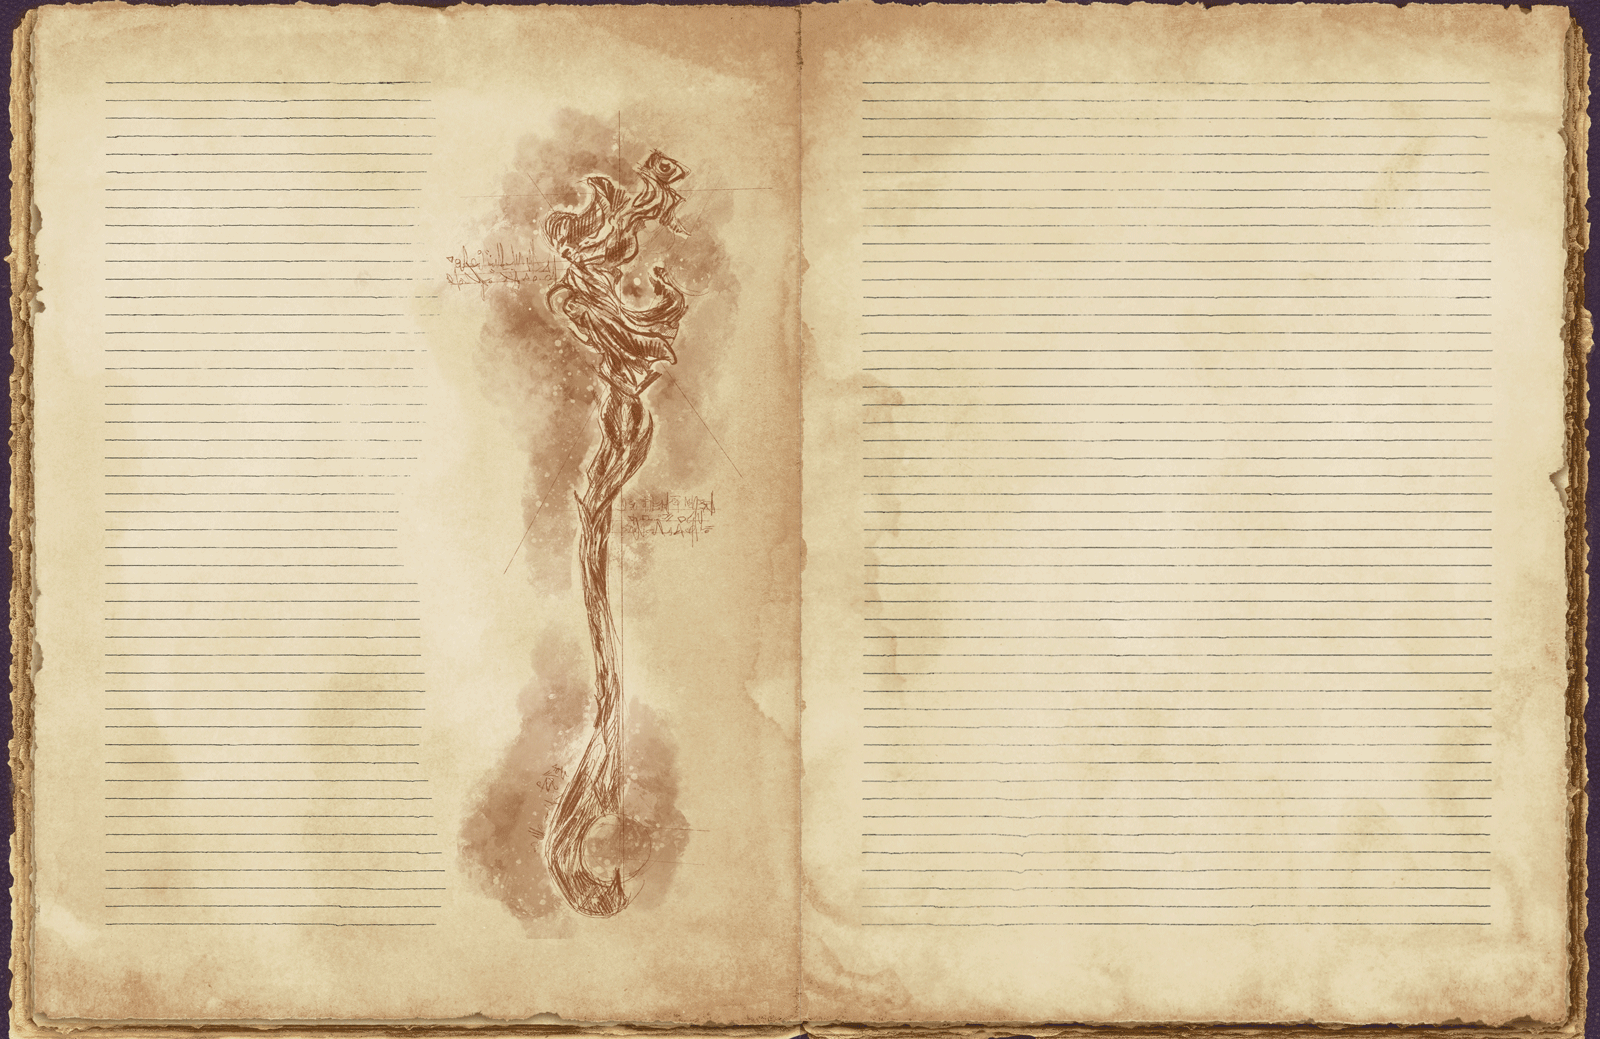 A blank lined journal with a parchment-like background and a sketched illustration of a branch-like staff